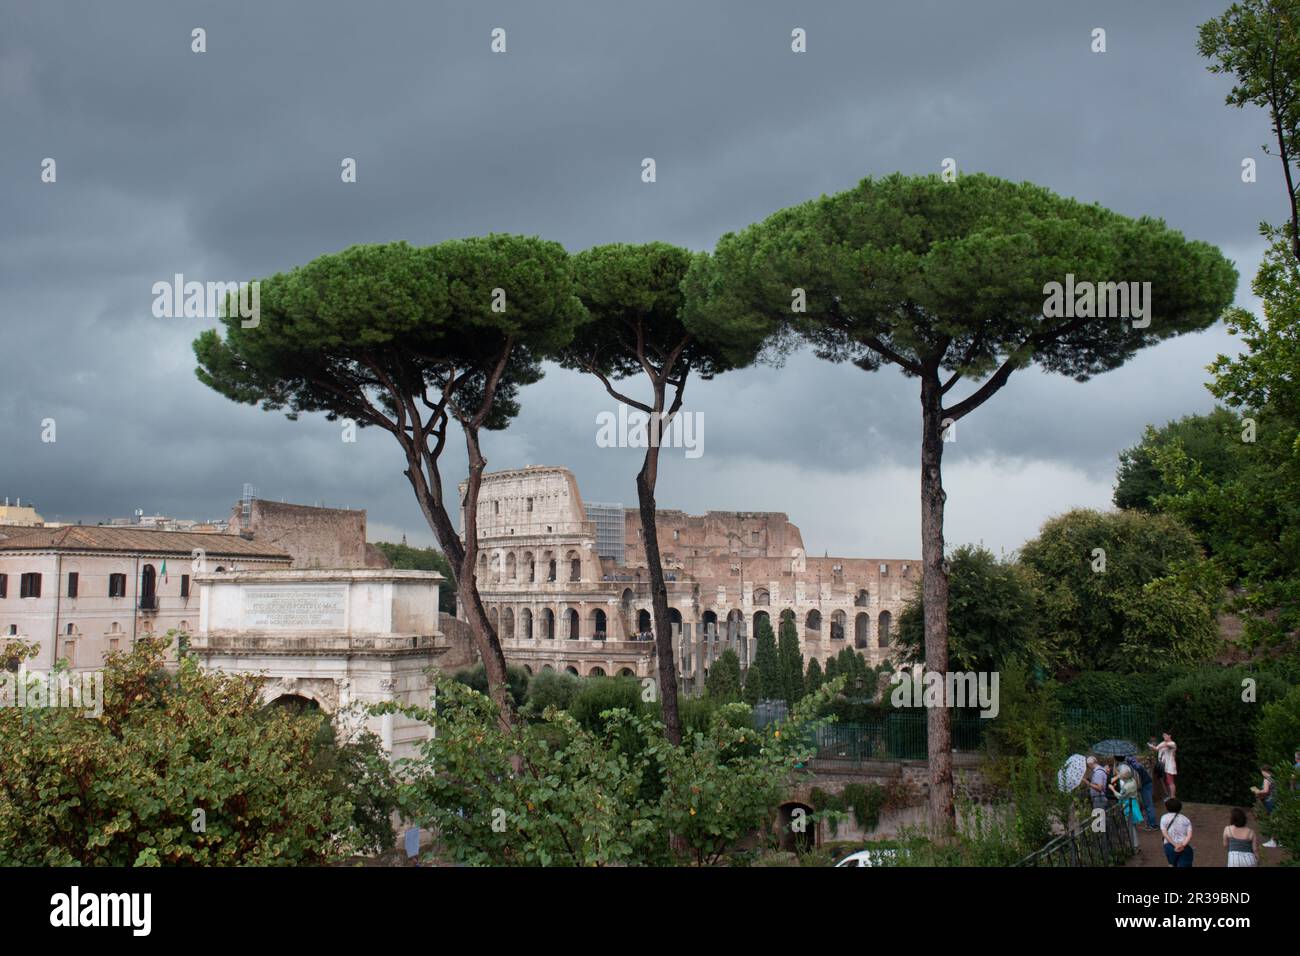 Colosseum viewed through umbrella pine trees from the forum Stock Photo